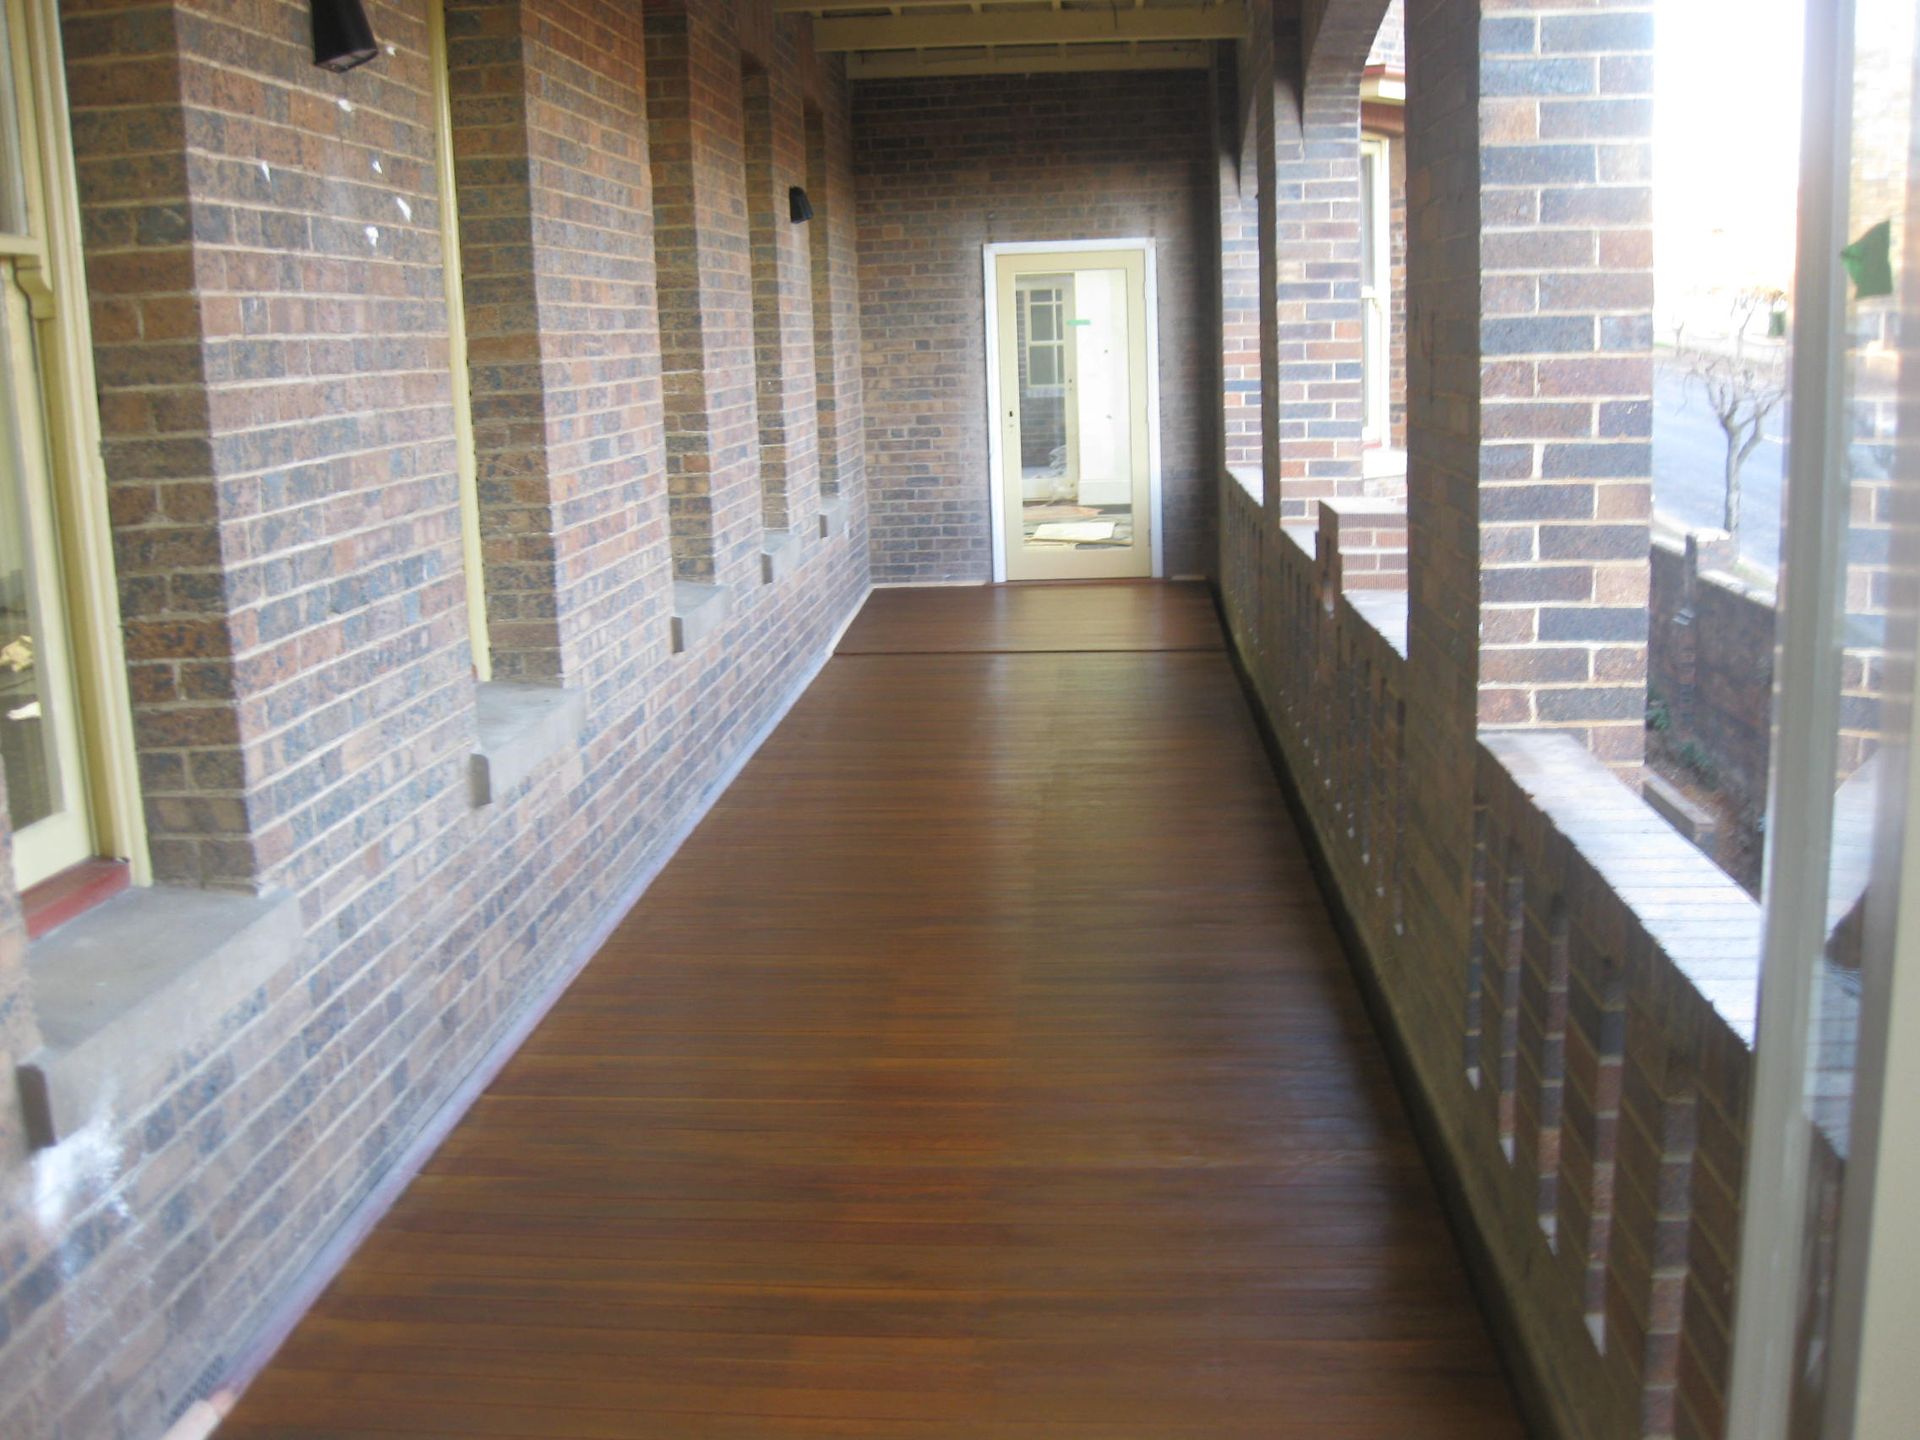 exterior corridor with timber floors at the Catholic Cathedral Precinct in Armidale